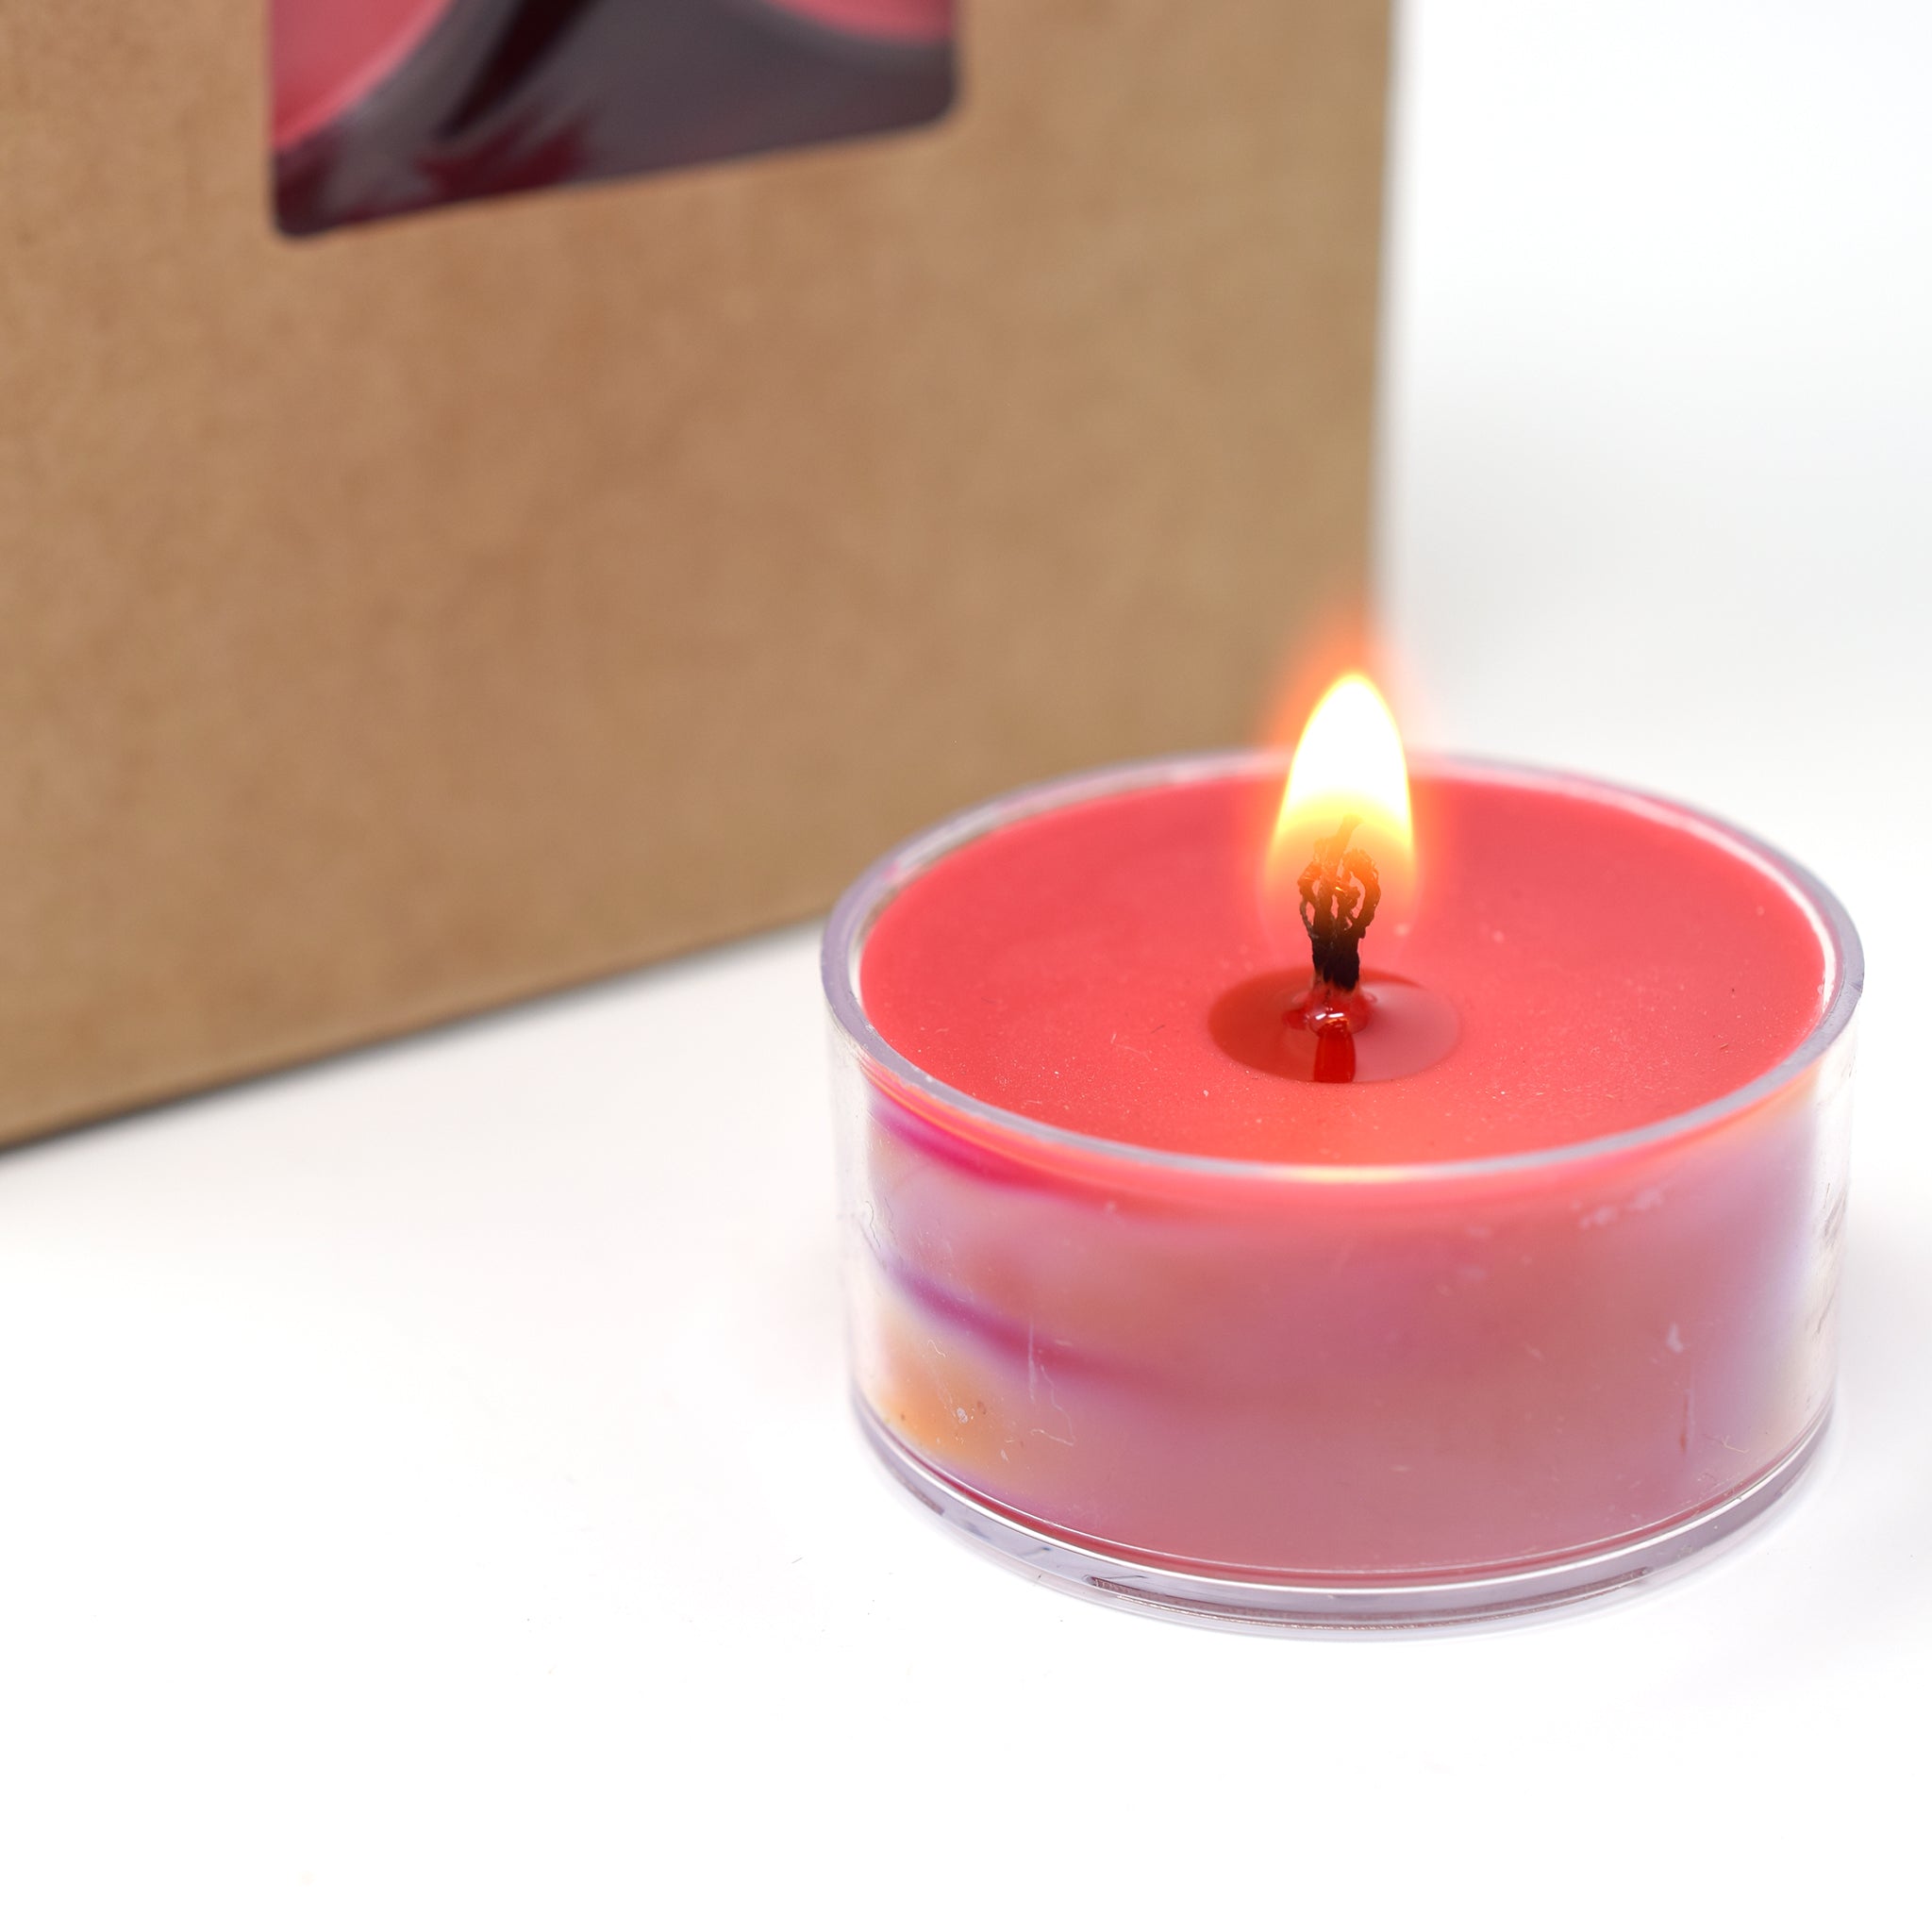 Red Currant, Soy Tea Light 12-Pack - Candeo Candle